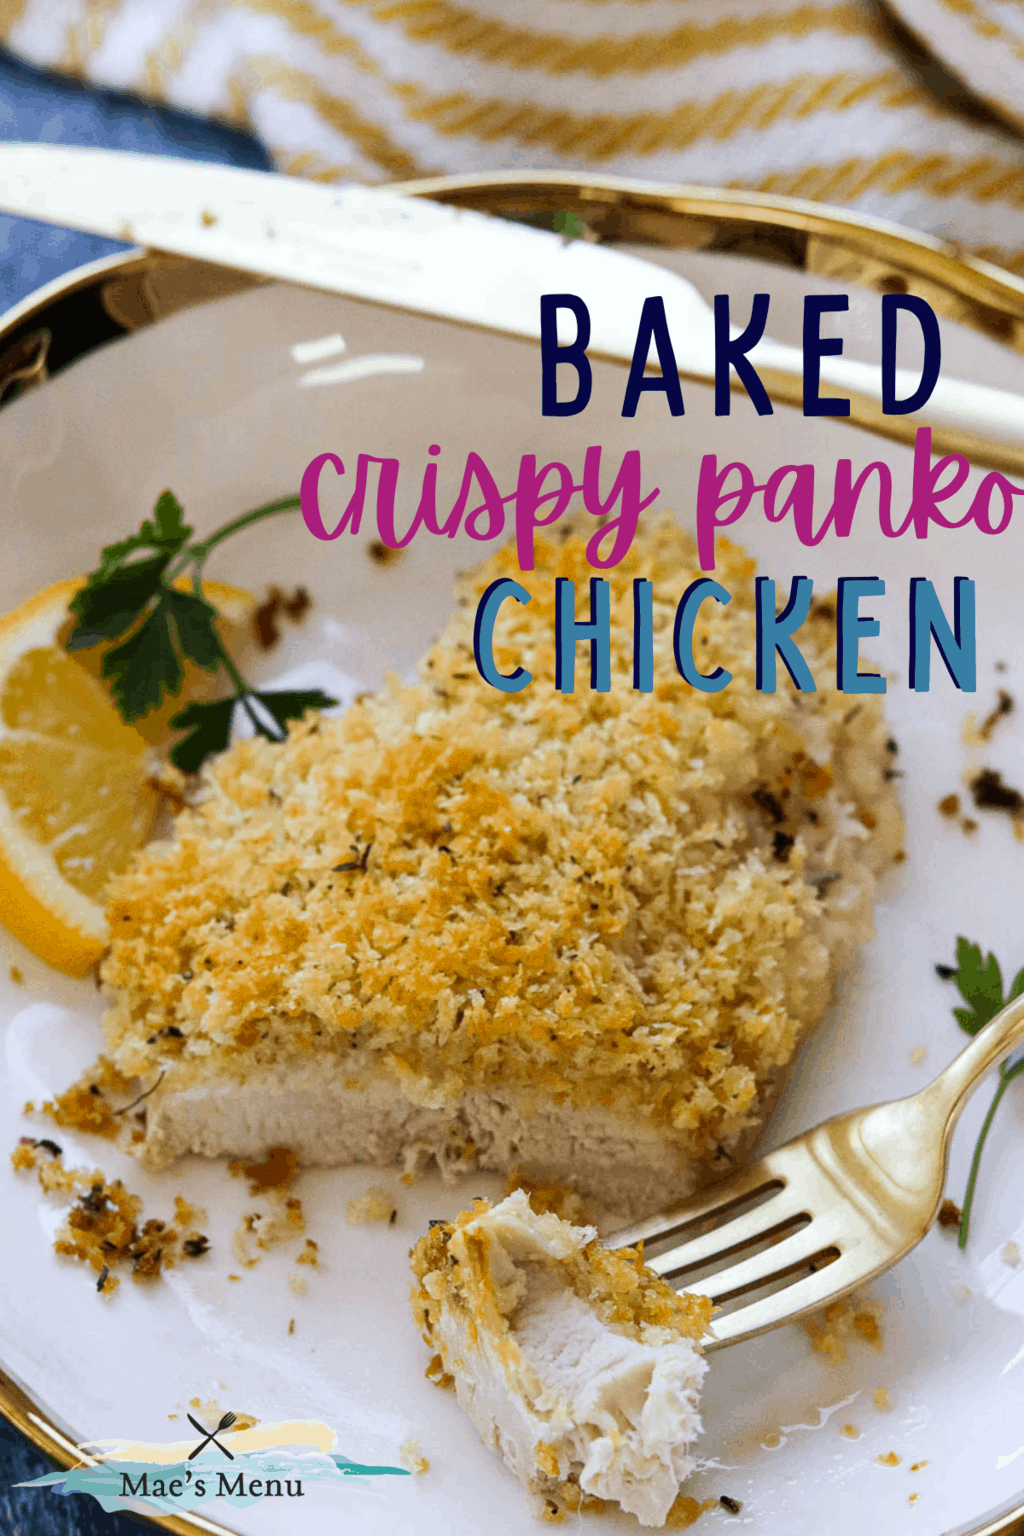 A pinterest pin for baked crispy panko chicken with an up-close shot of a bite of chicken 